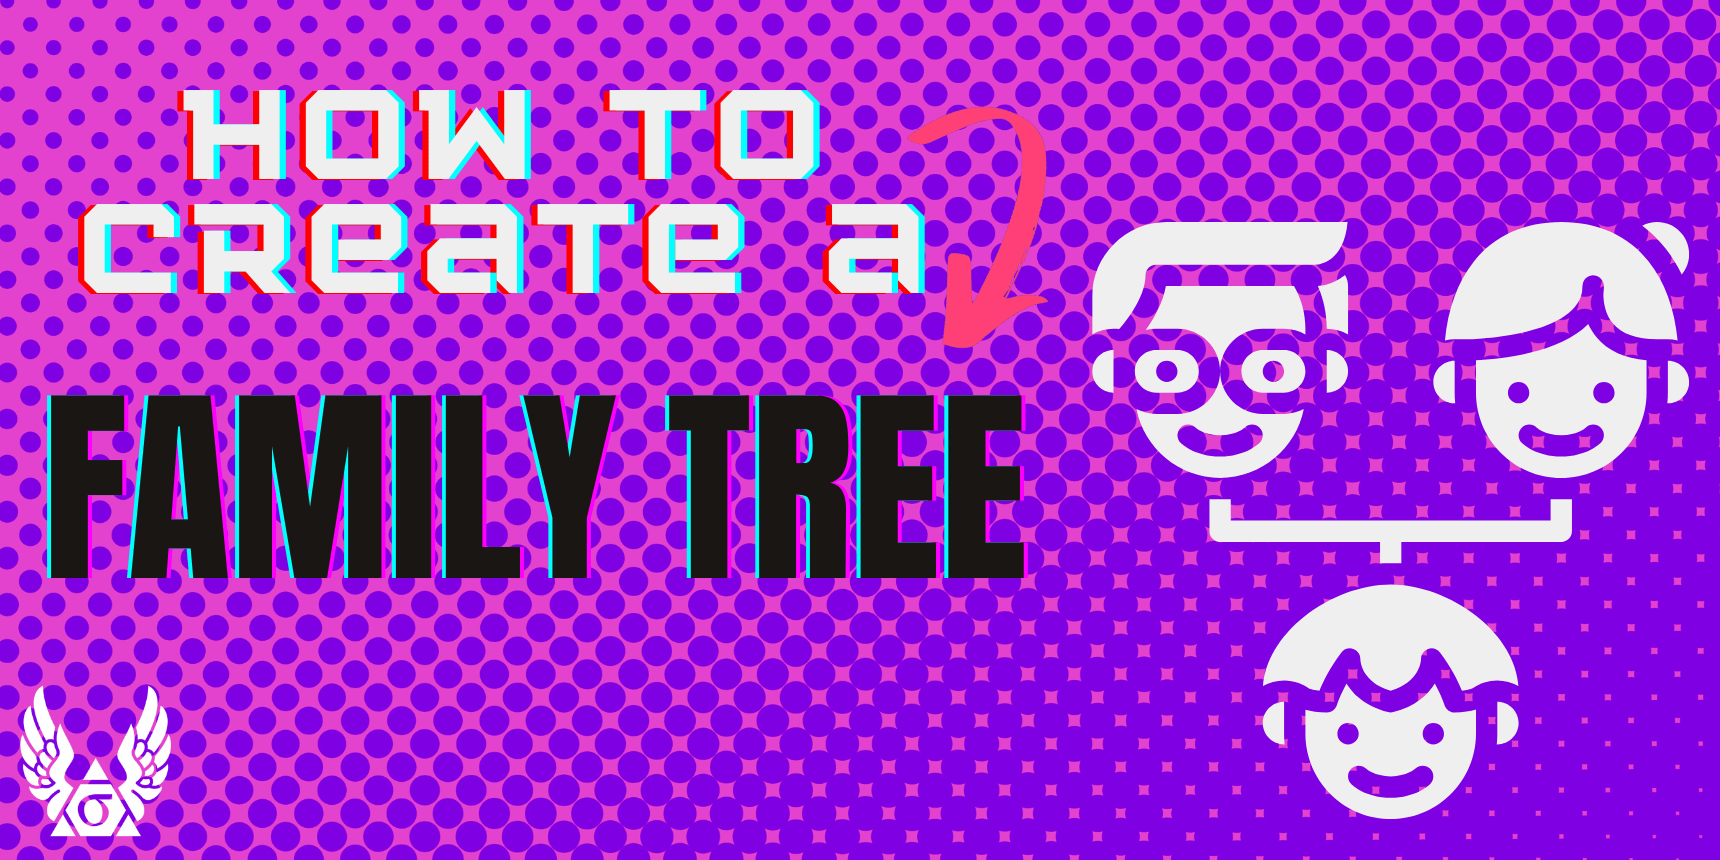 Family Tree for Kids: How to Make One